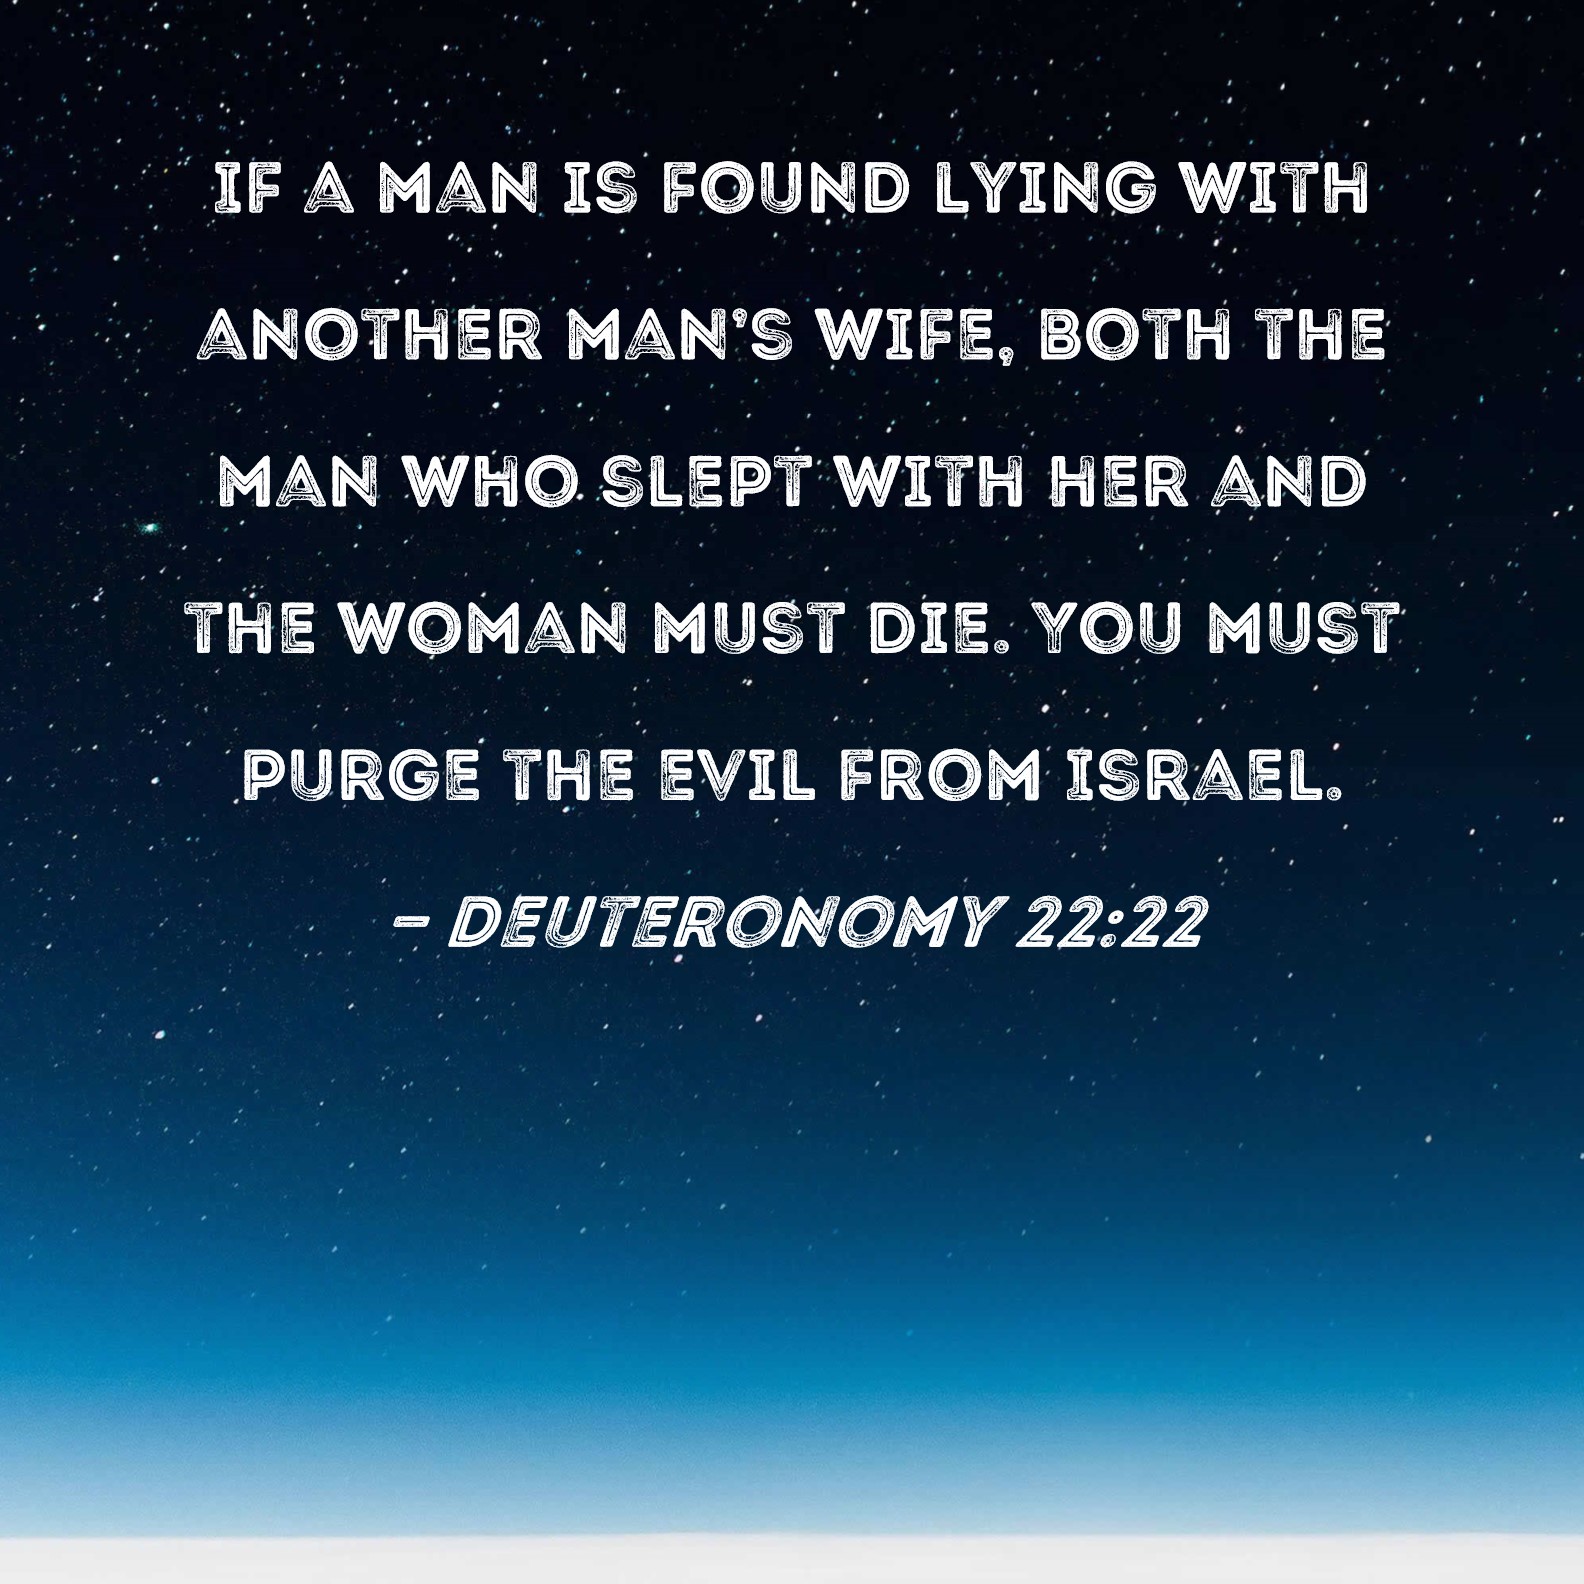 Deuteronomy 2222 If a man is found lying with another mans wife, both the man who slept with her and the woman must